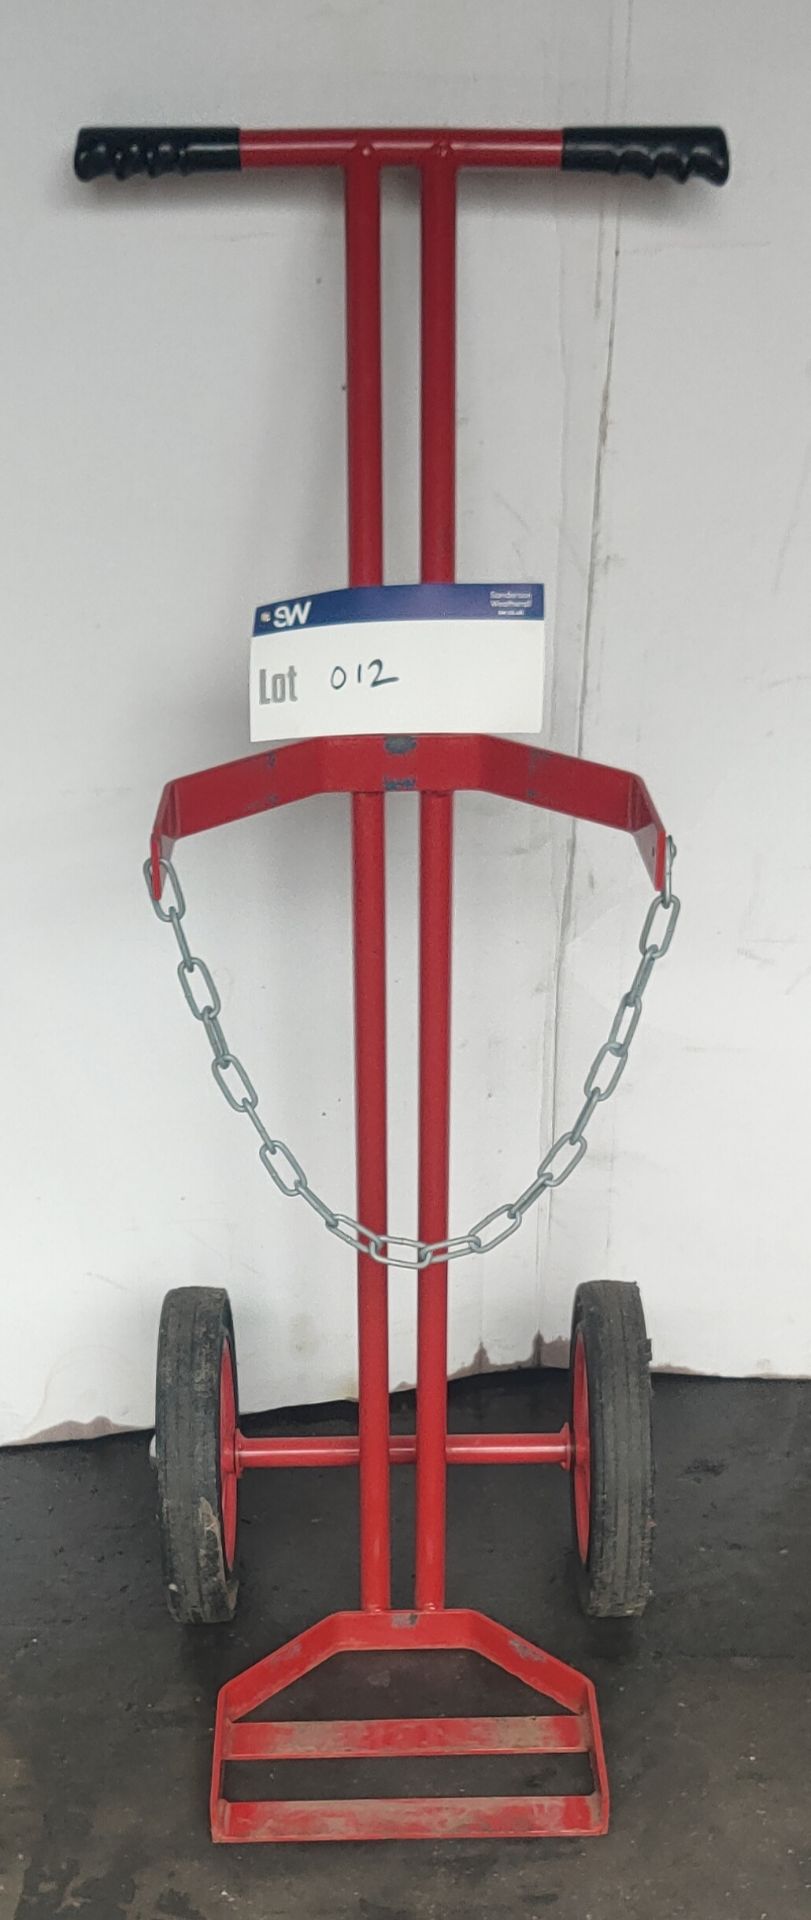 Gas Bottle Transporter, approx. 115cm x 40cm x 40cm, loading free of charge - yes (vendors